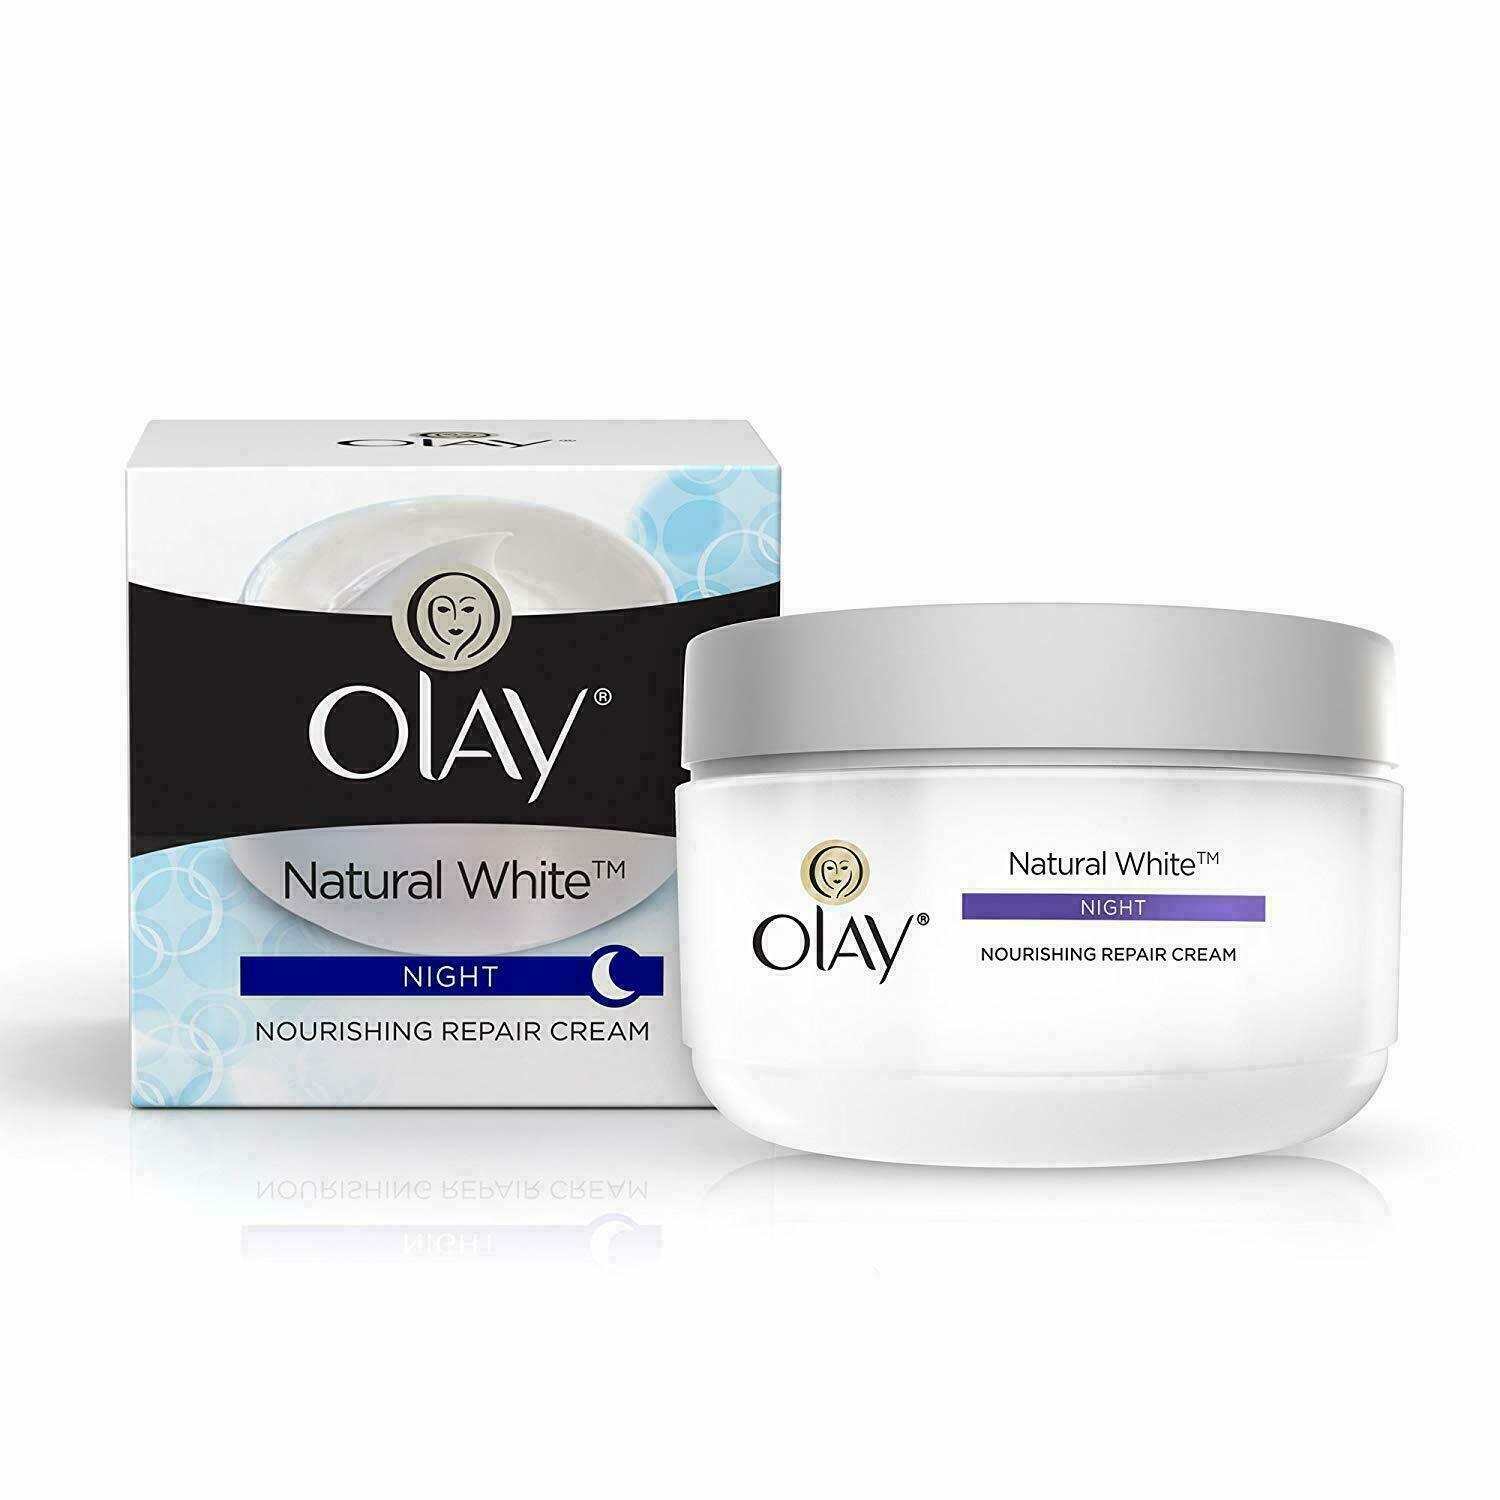 Olay natural white night nutritious restorative cream 50g free shipping for...